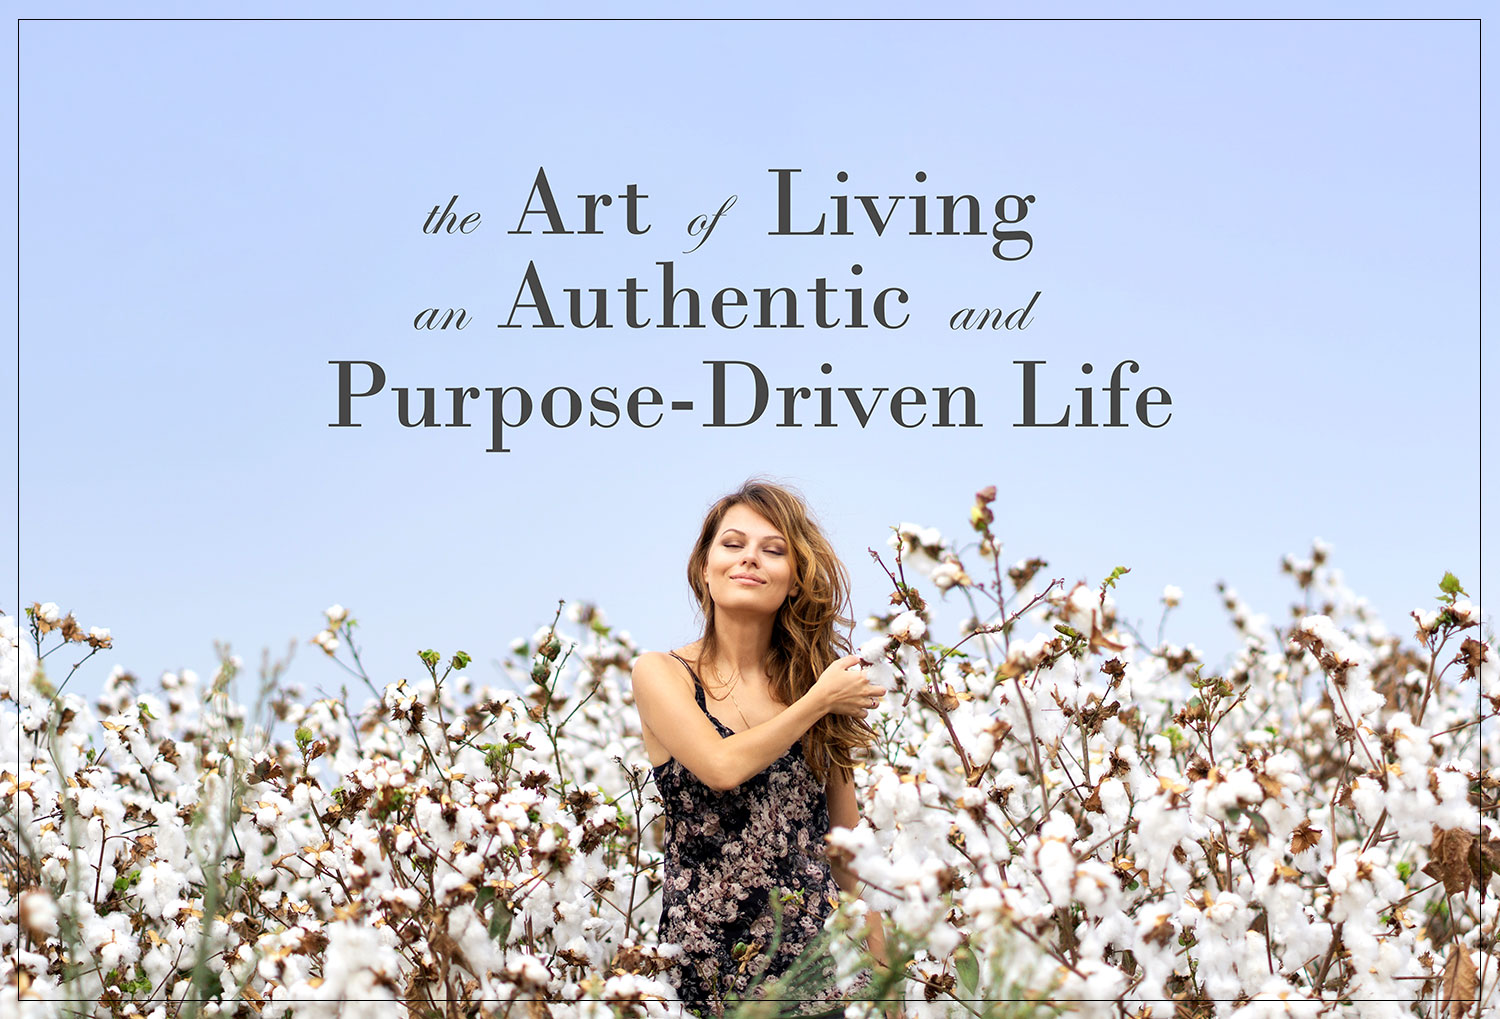 The Art of Living an Authentic and Purpose-Driven Life